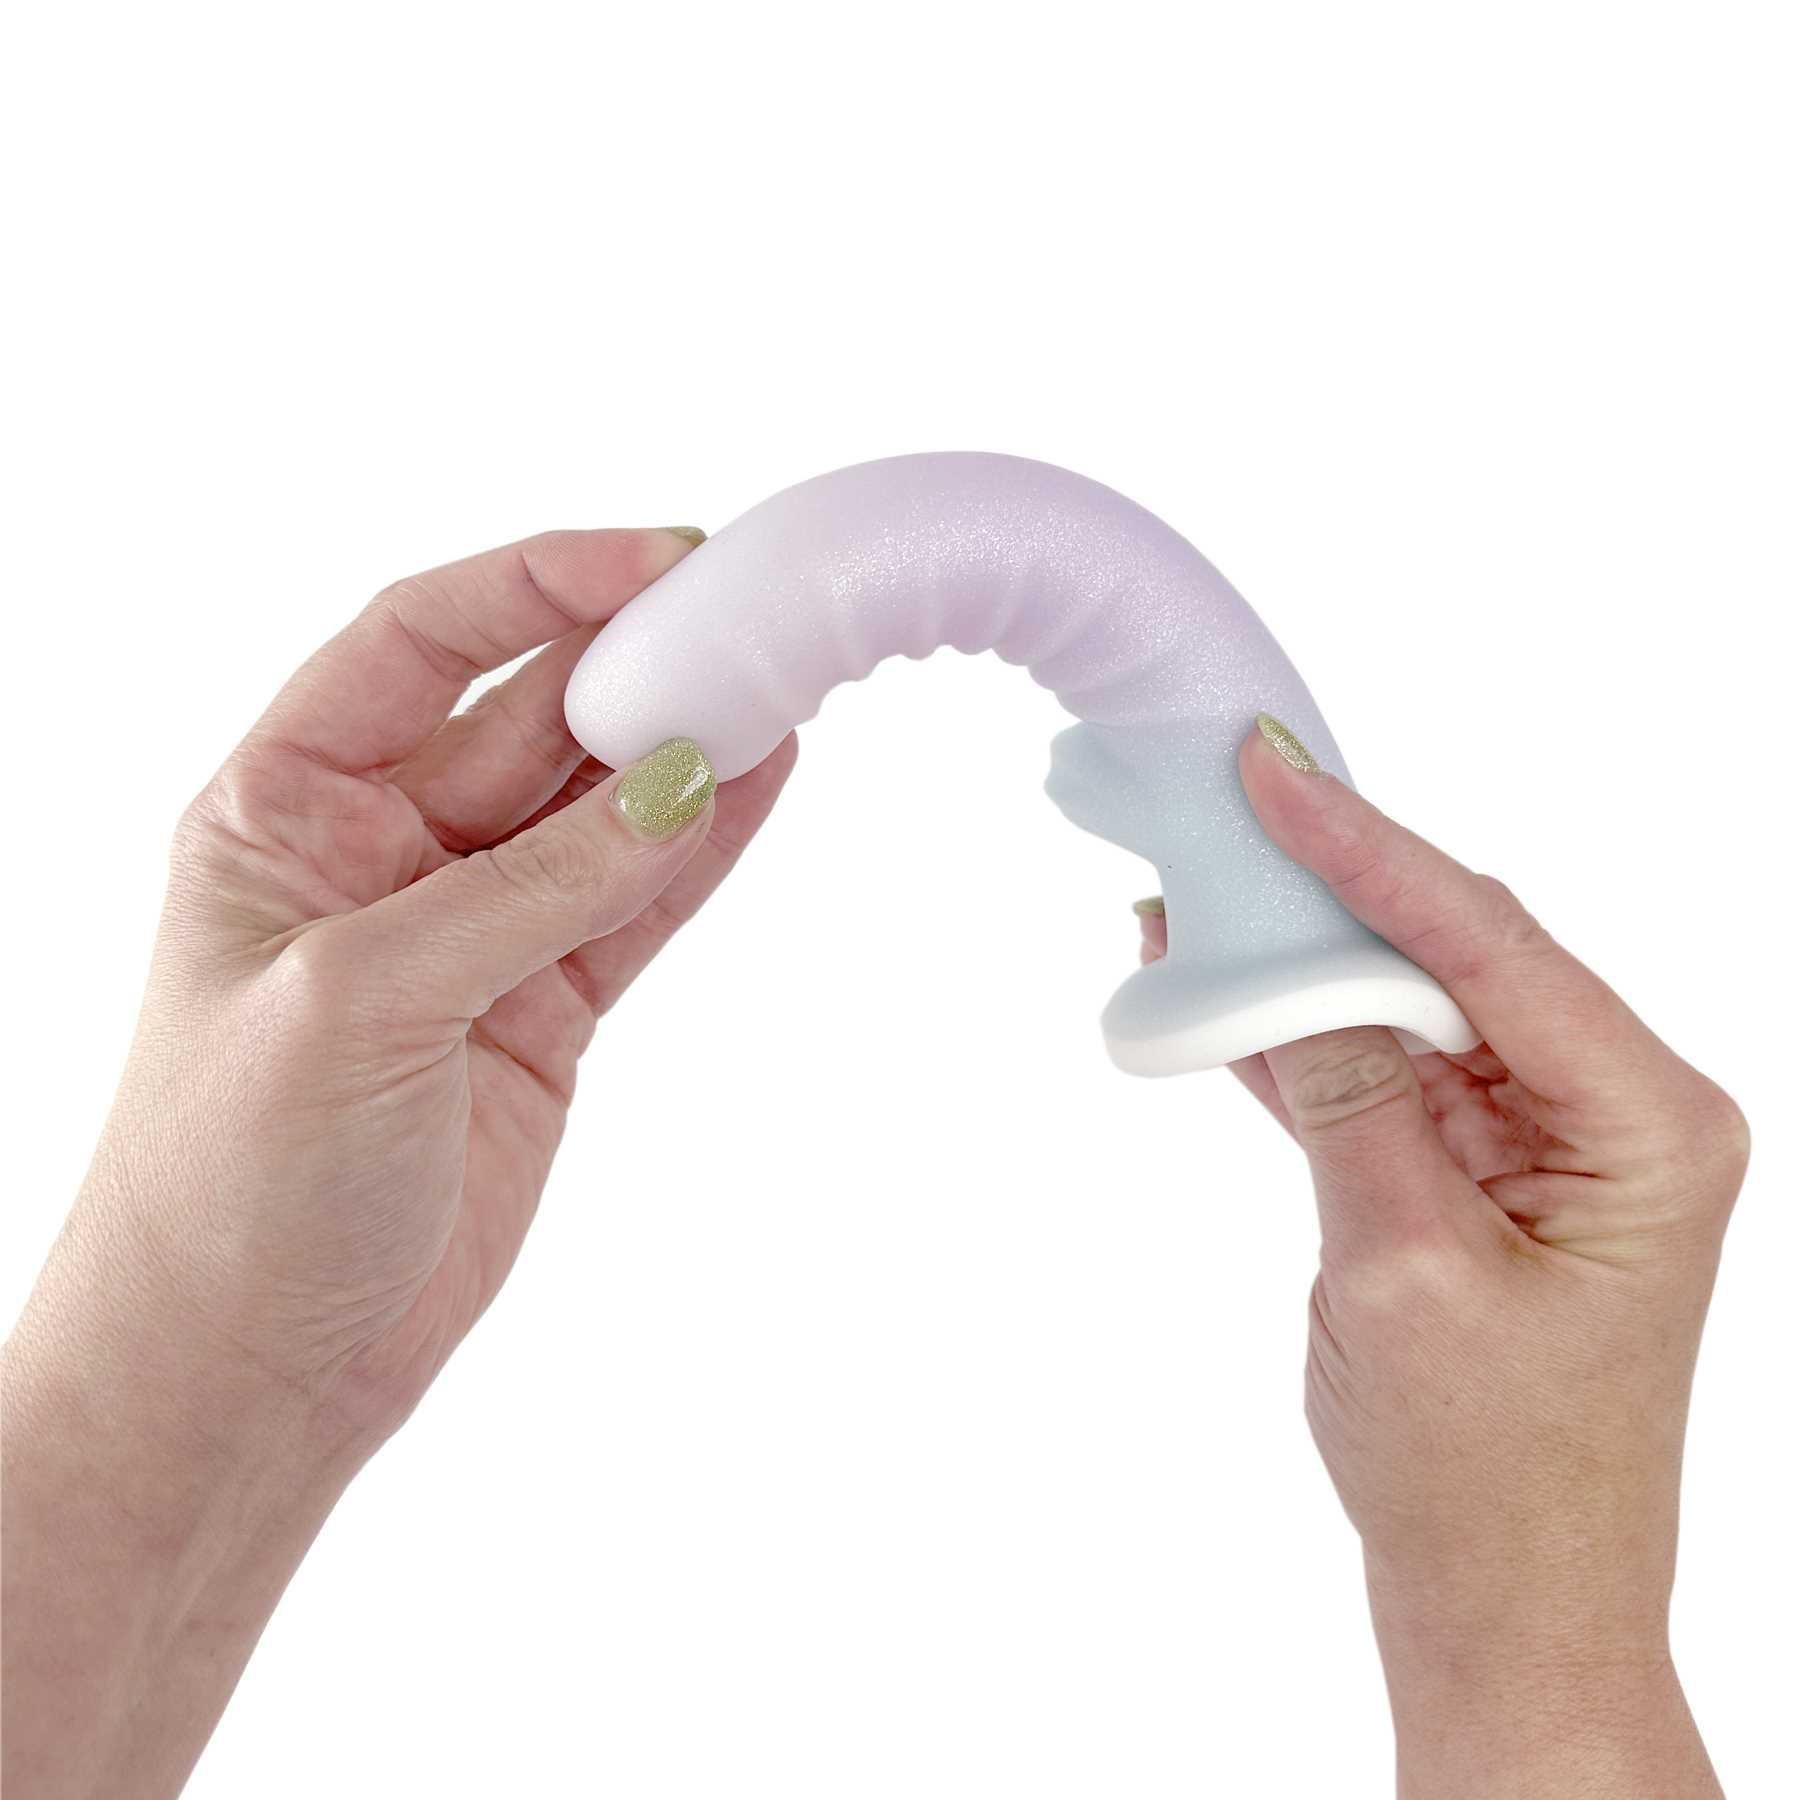 Cotton Candy Sweet Tooth 6.7 Silicone Dildo hand held